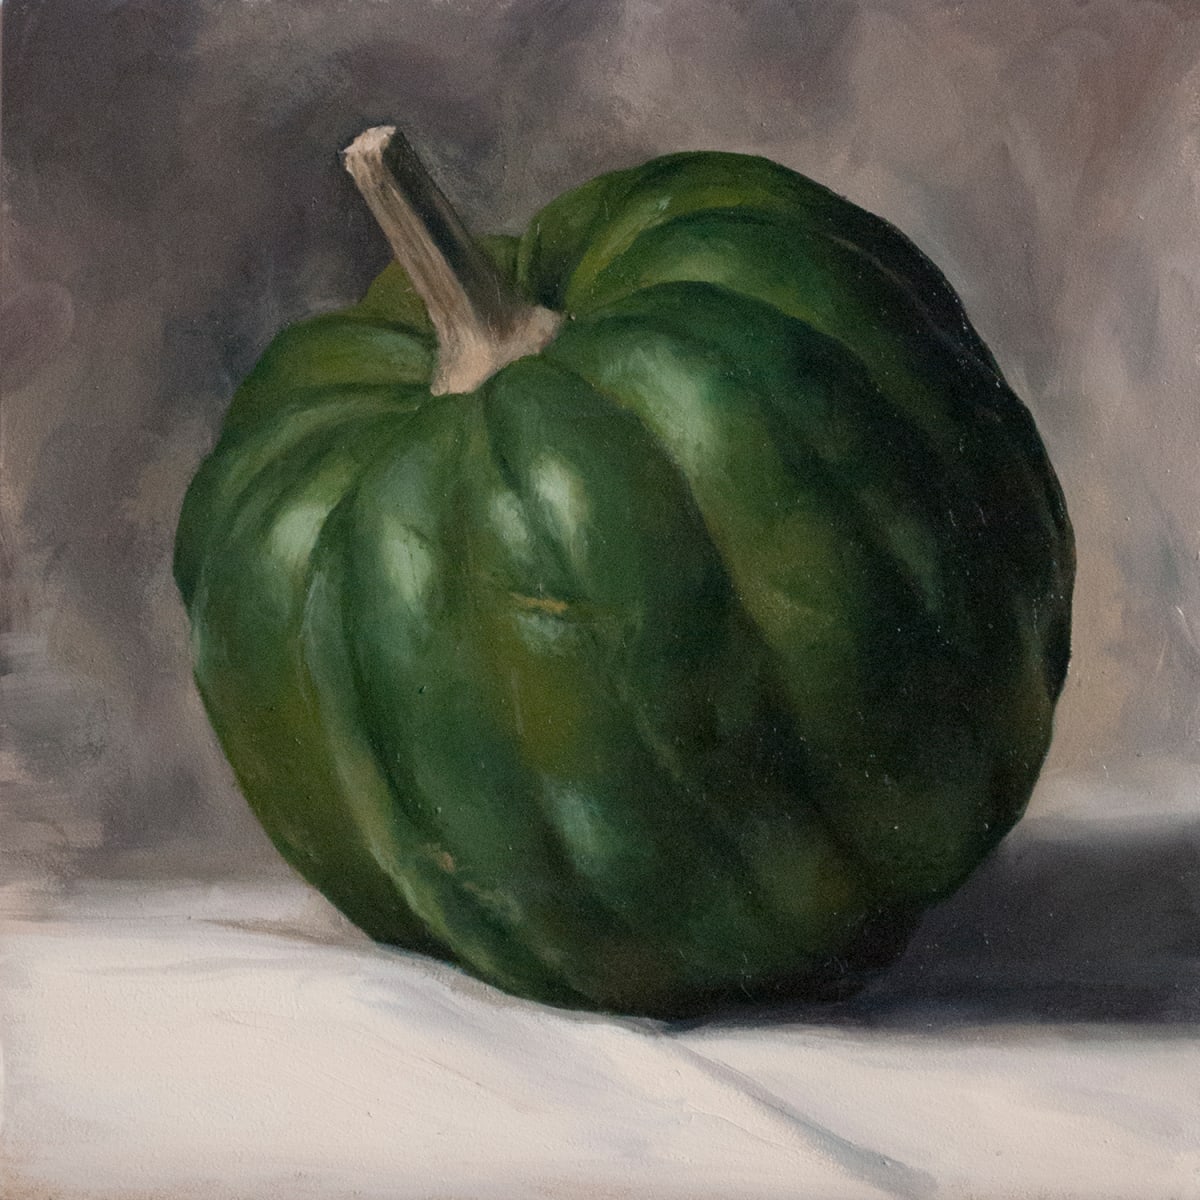 Acorn Squash Study by Sarah Marie Lacy  Image: Entire painting - unframed
